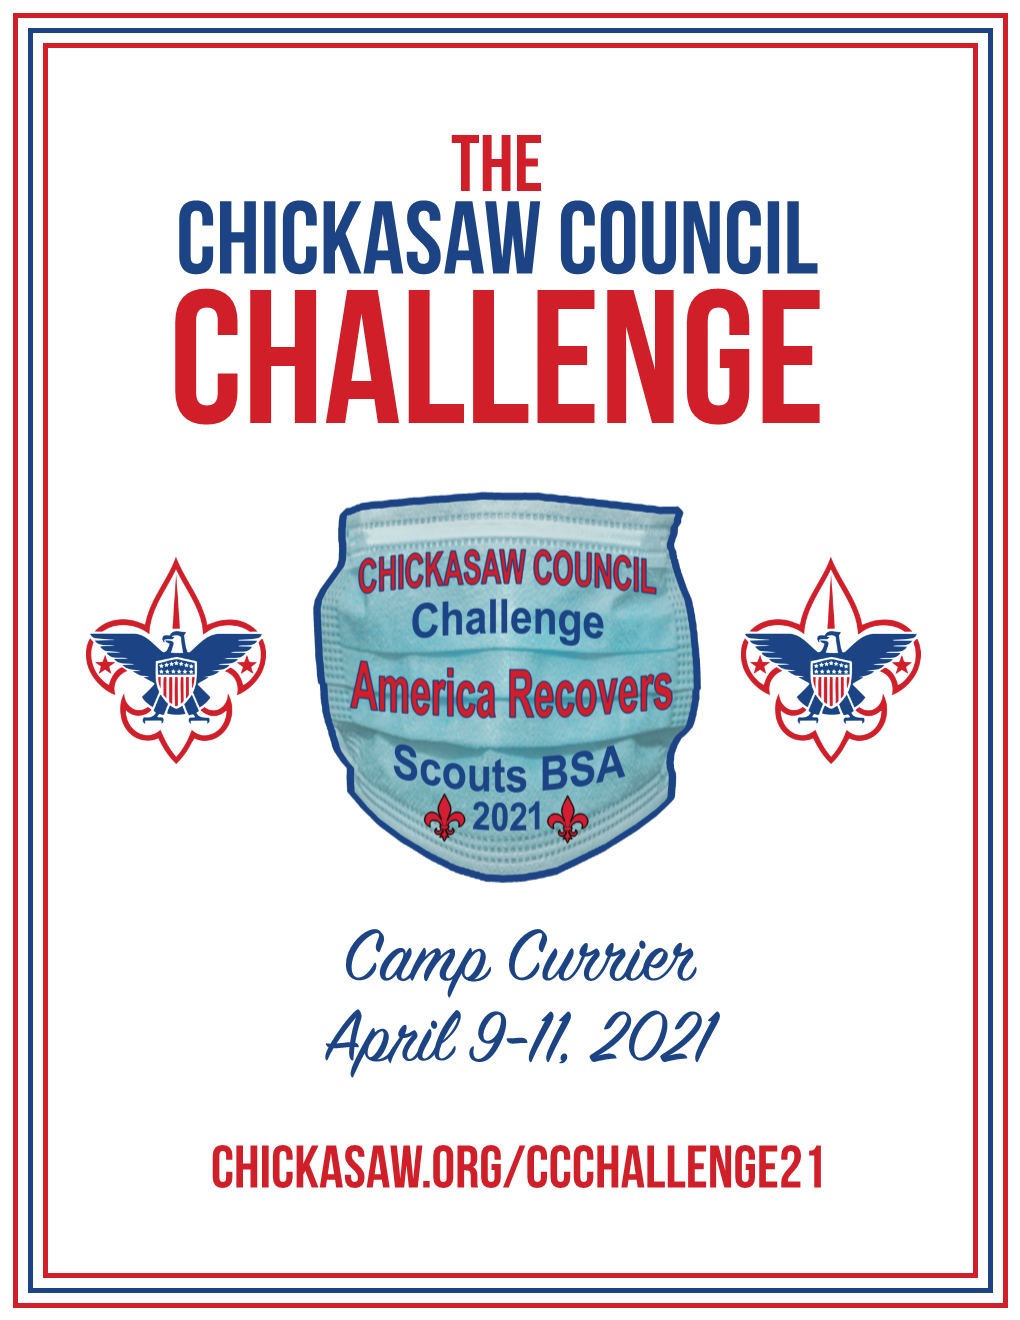 The 2021 Chickasaw Council Challenge Leaders Guide